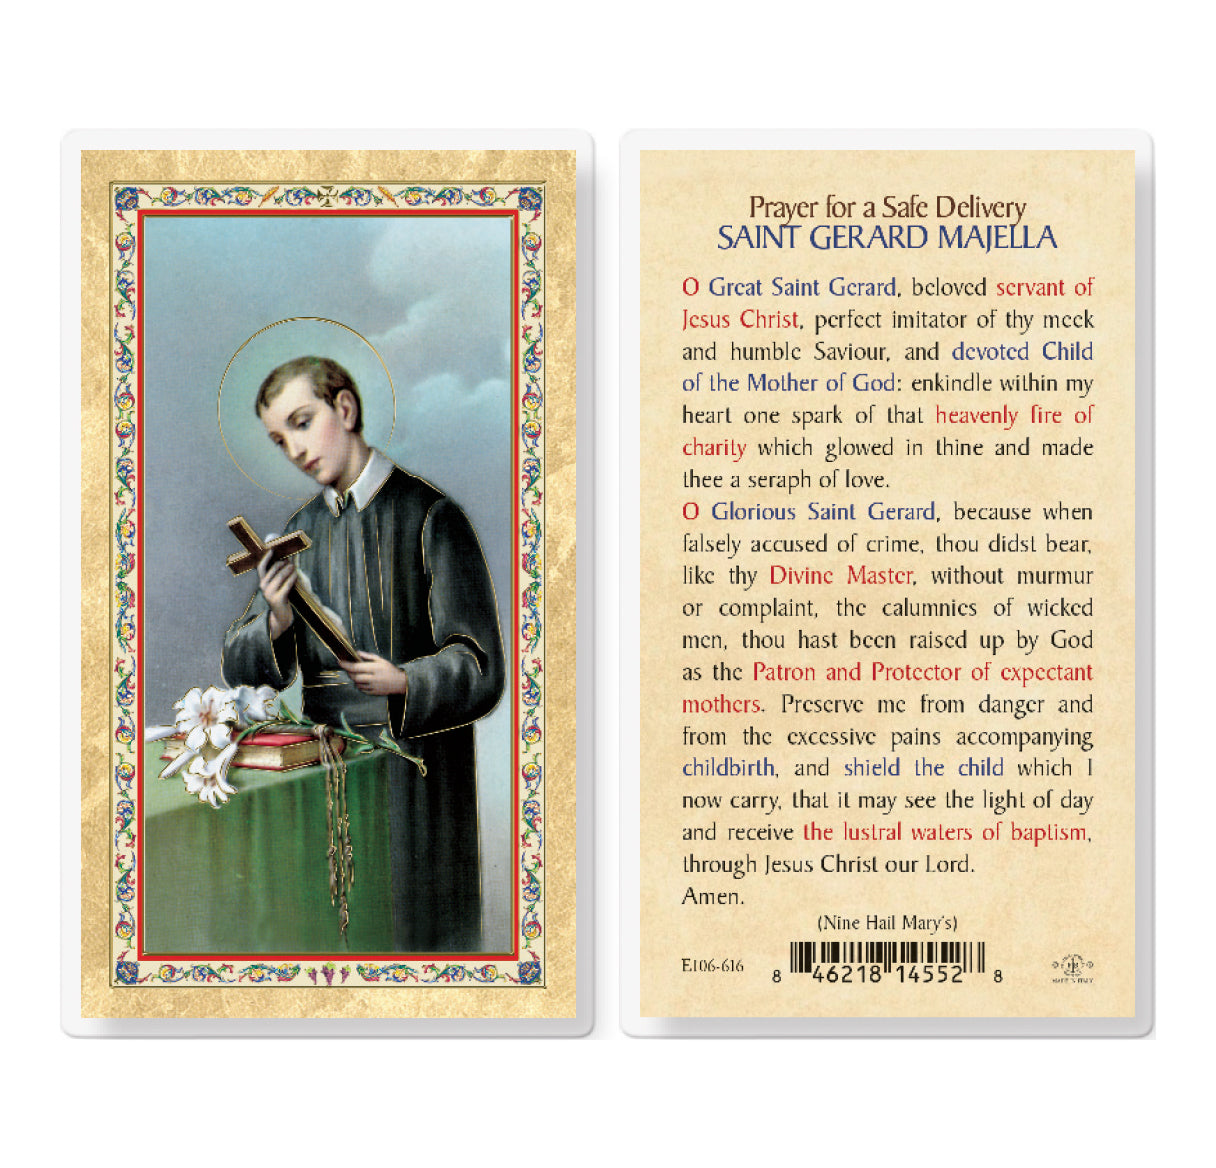 St. Gerard - Prayer for Safe Delivery Gold-Stamped Laminated Catholic Prayer Holy Card with Prayer on Back, Pack of 25